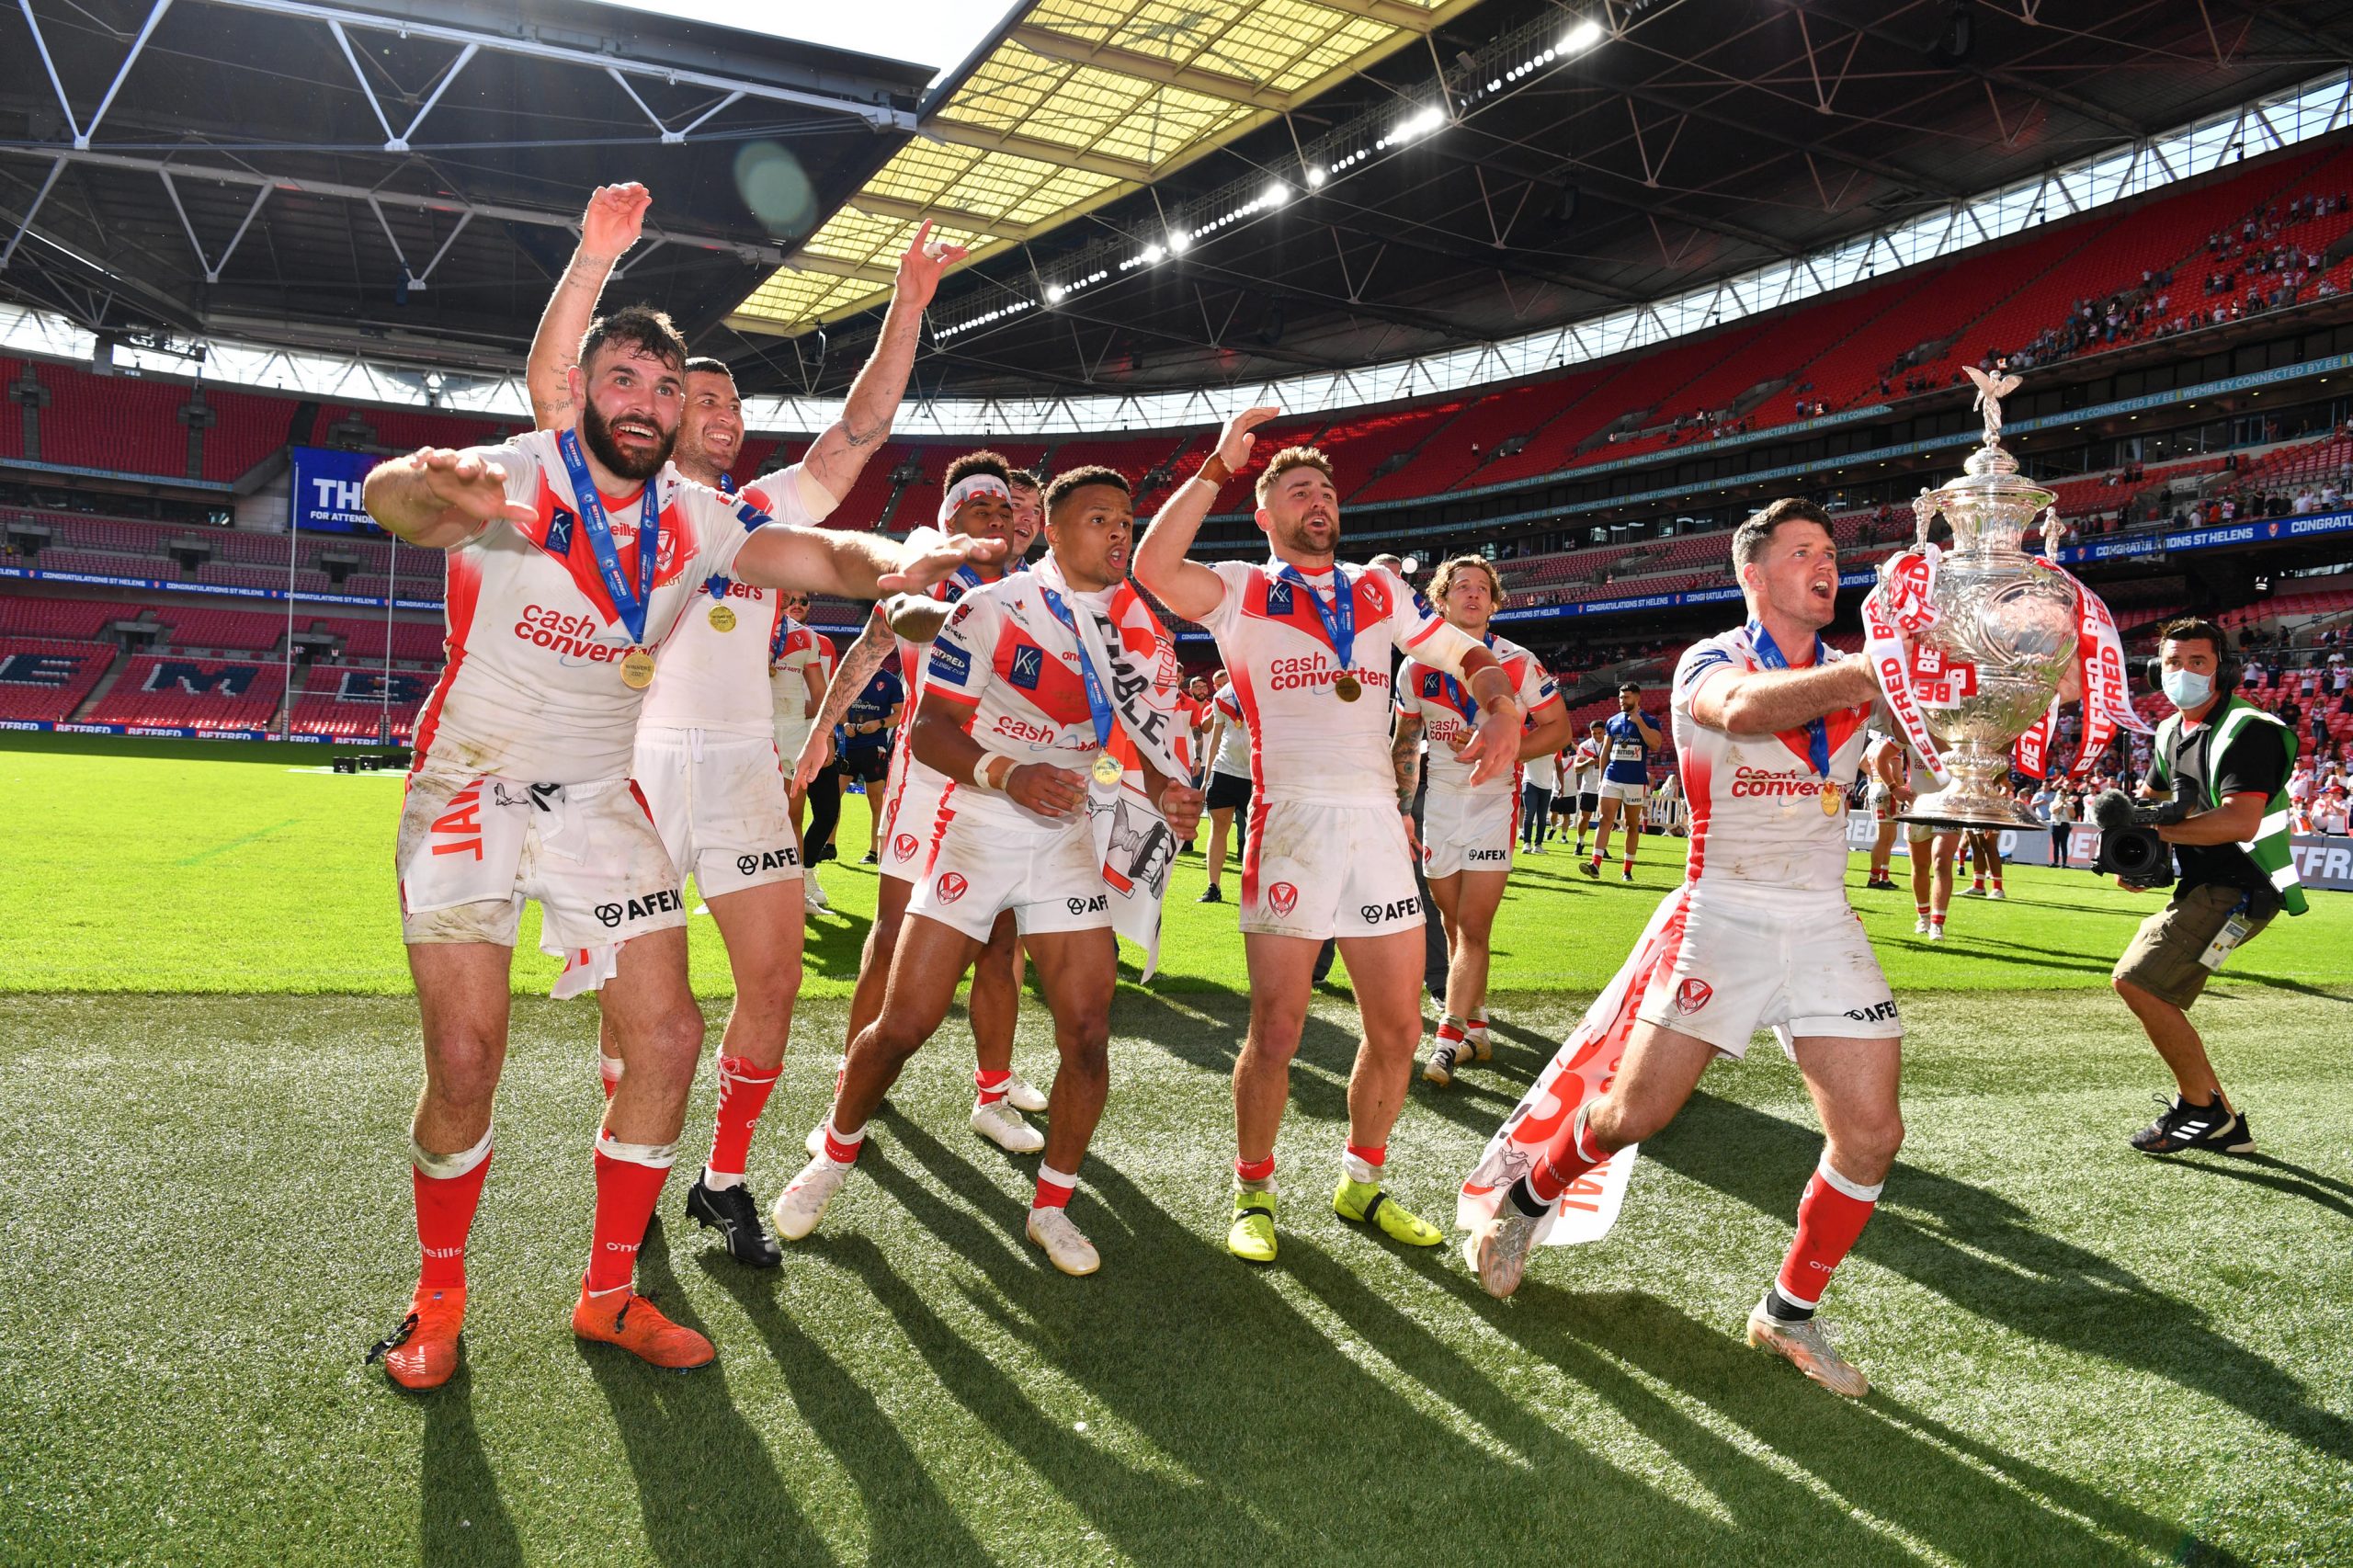 St Helens celebrate their Challenge Cup final win over Castleford Tigers at Wembley in July 